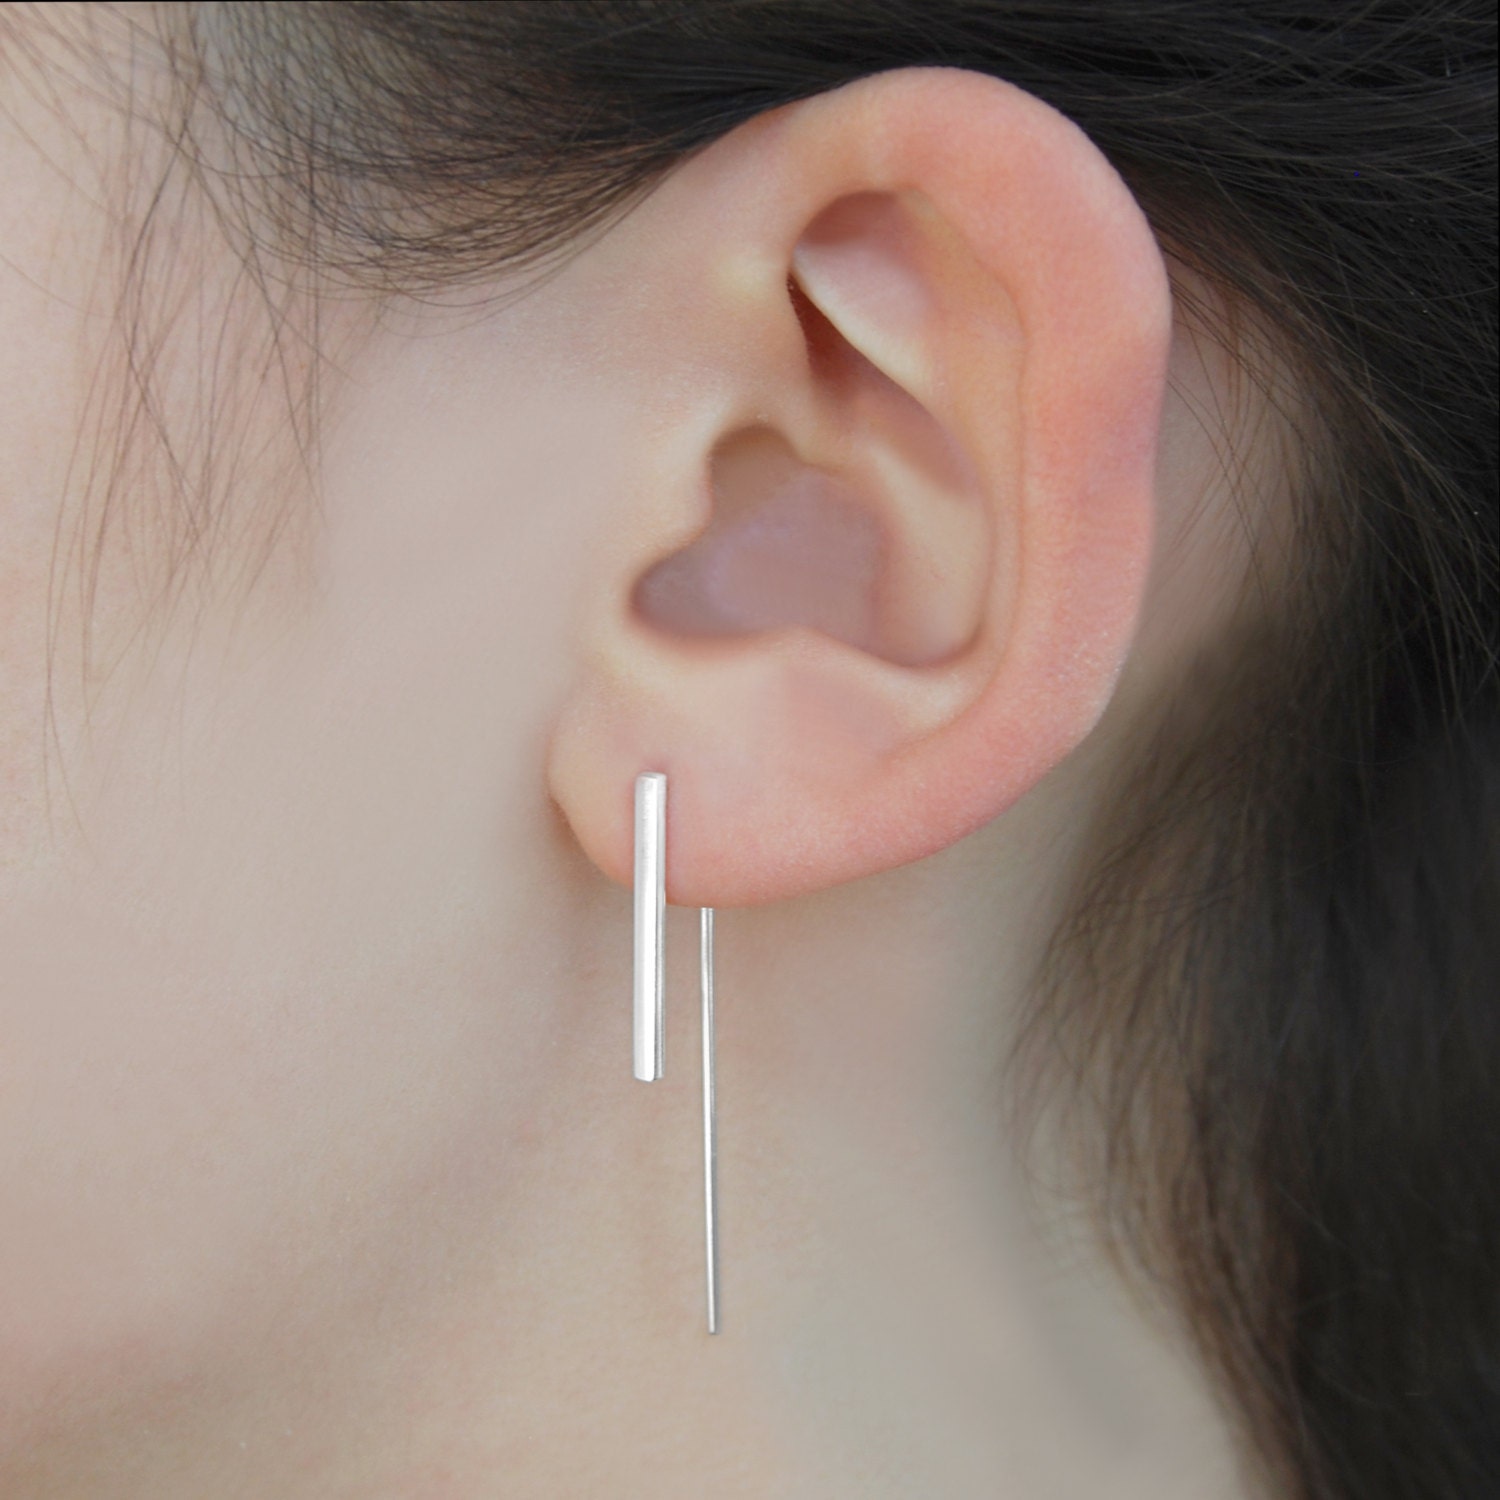 Minimalist Simple Curved Bar Stud Earrings Sterling Silver Demure Classic Chic Fashion Ecosilver 925 Recycled Silver